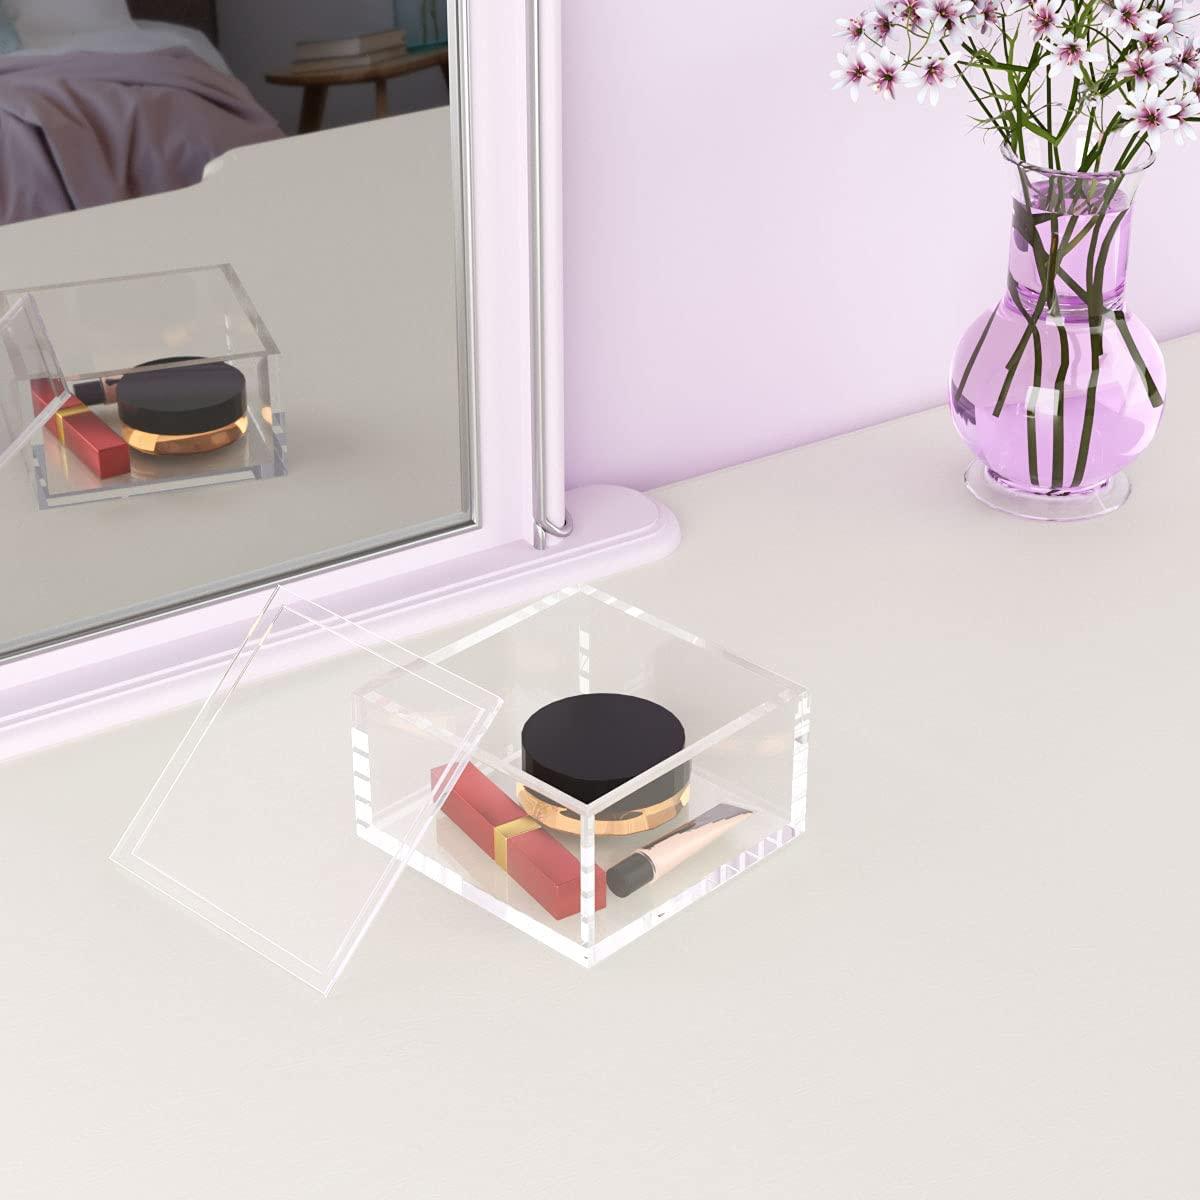 Large Acrylic Box with Lid